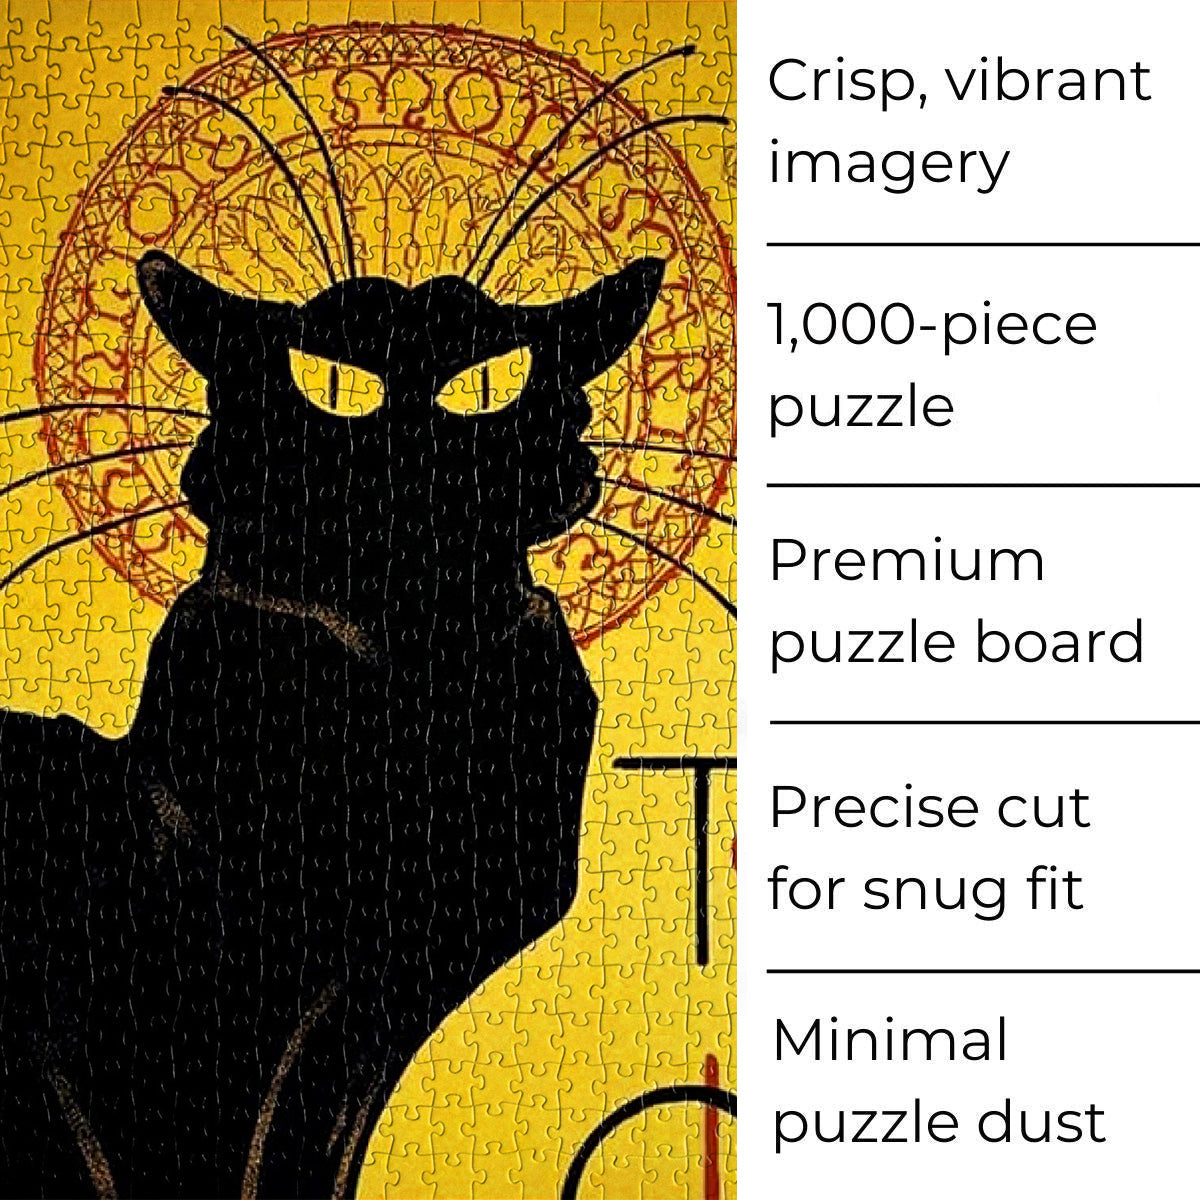 The best quality jigsaw puzzle of Théophile Steinlen's Le Chat Noir poster artwork.